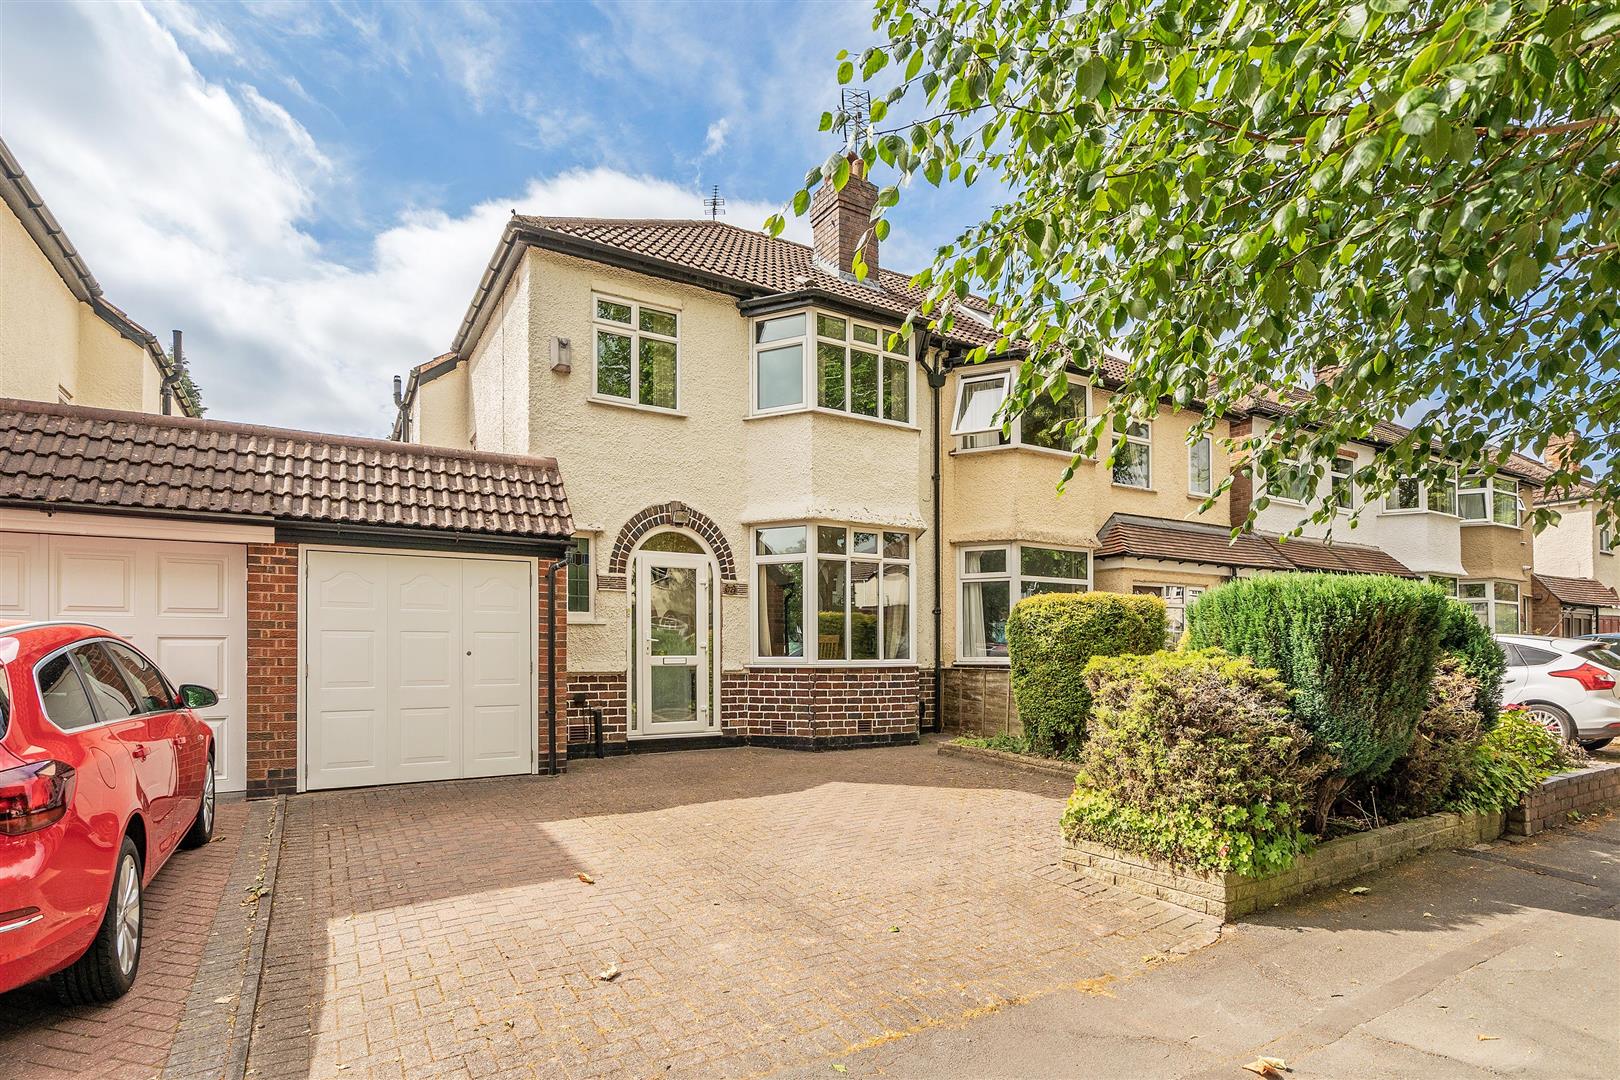 3 bed  for sale in Cropthorne Road, Solihull, B90 